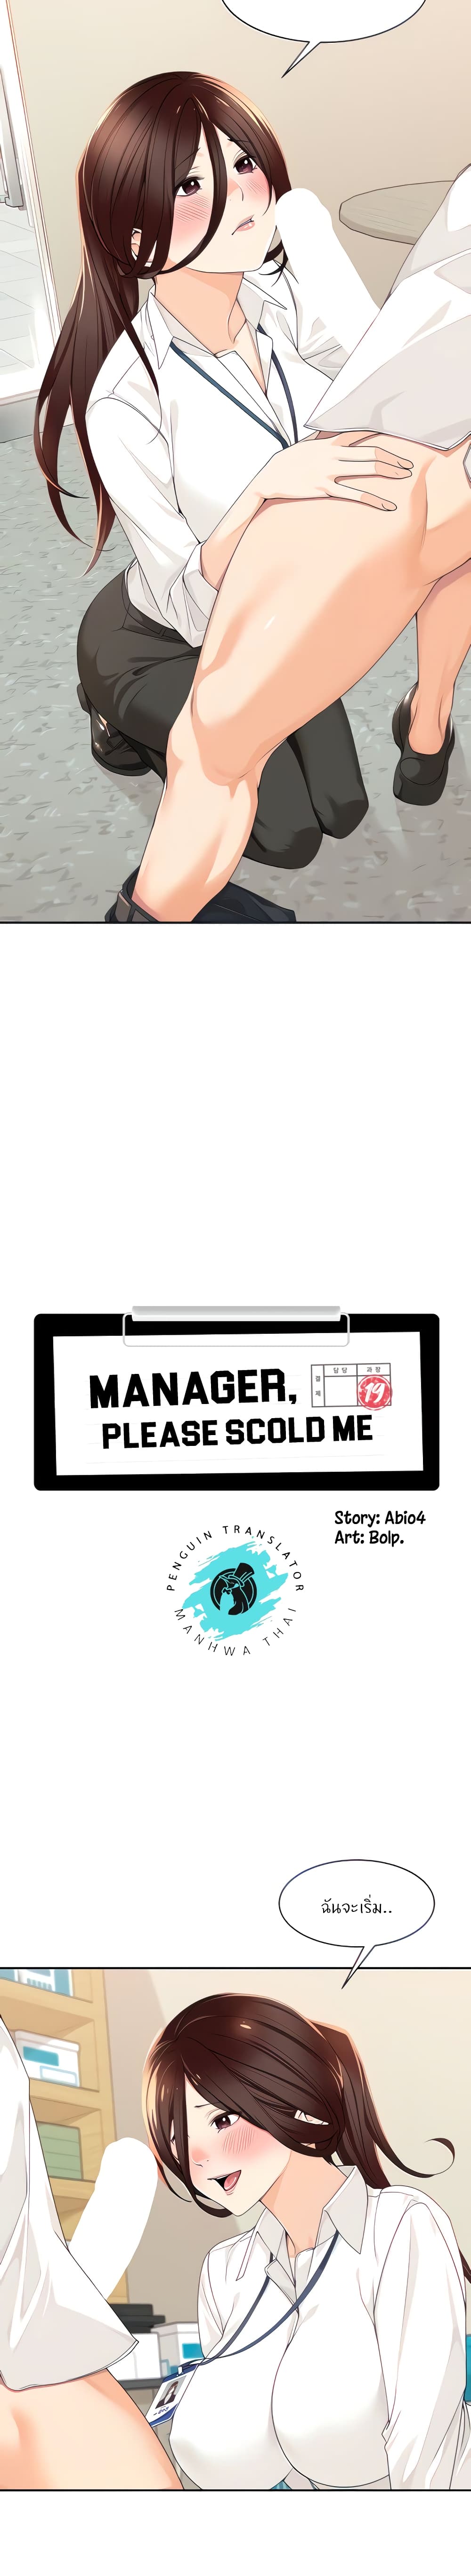 Manager, Please Scold Me 6-6